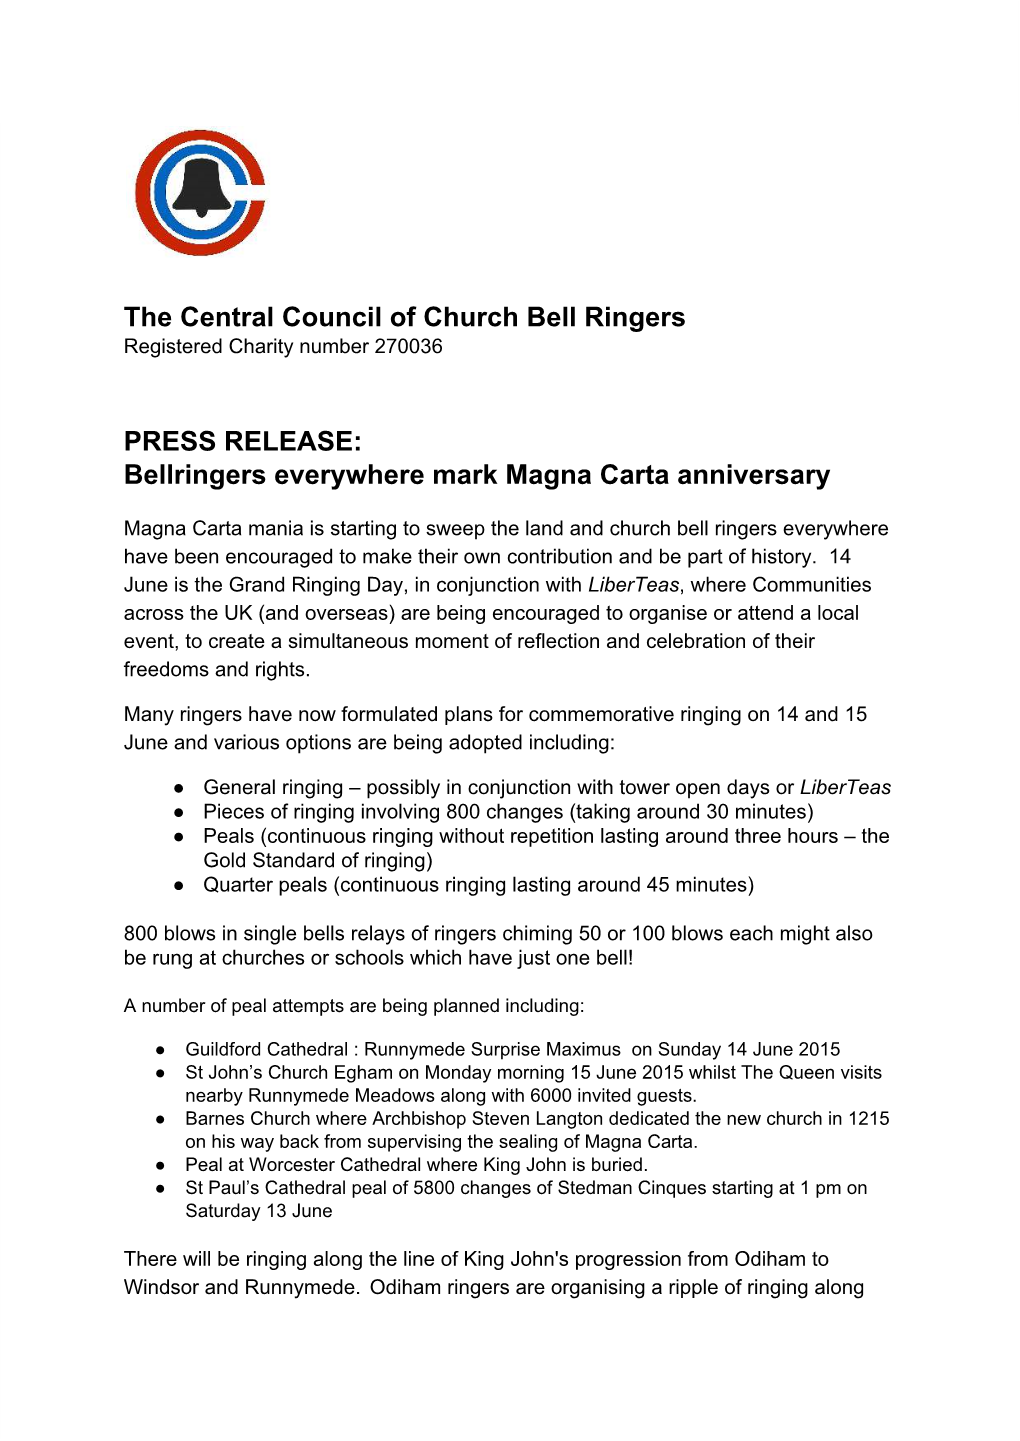 The Central Council of Church Bell Ringers PRESS RELEASE